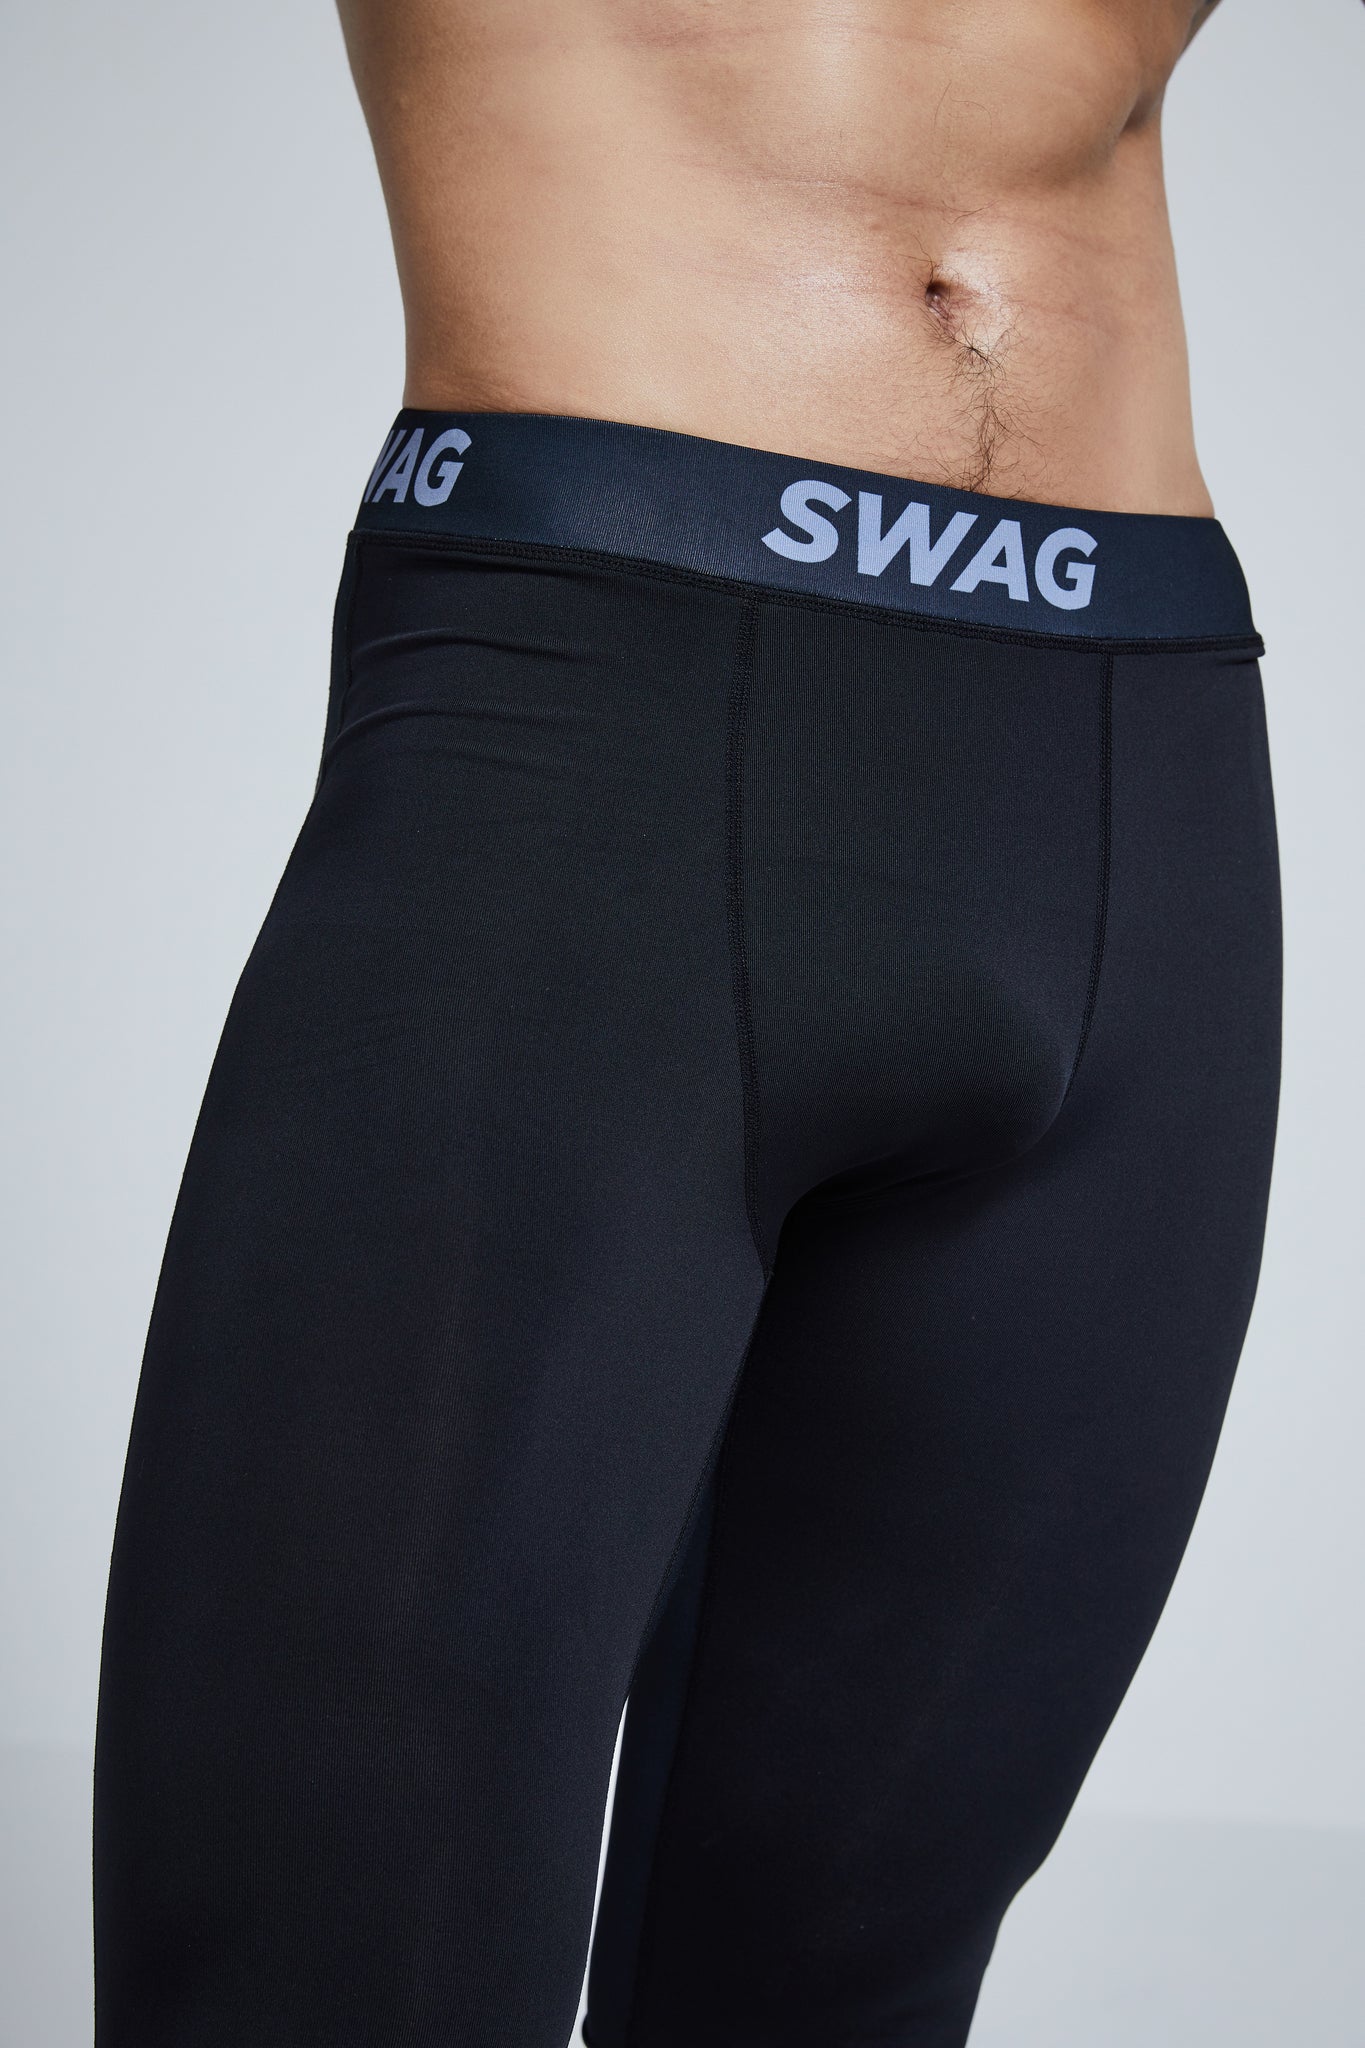 OMG® Swag Style Tights – OMG Sportswear Pacific